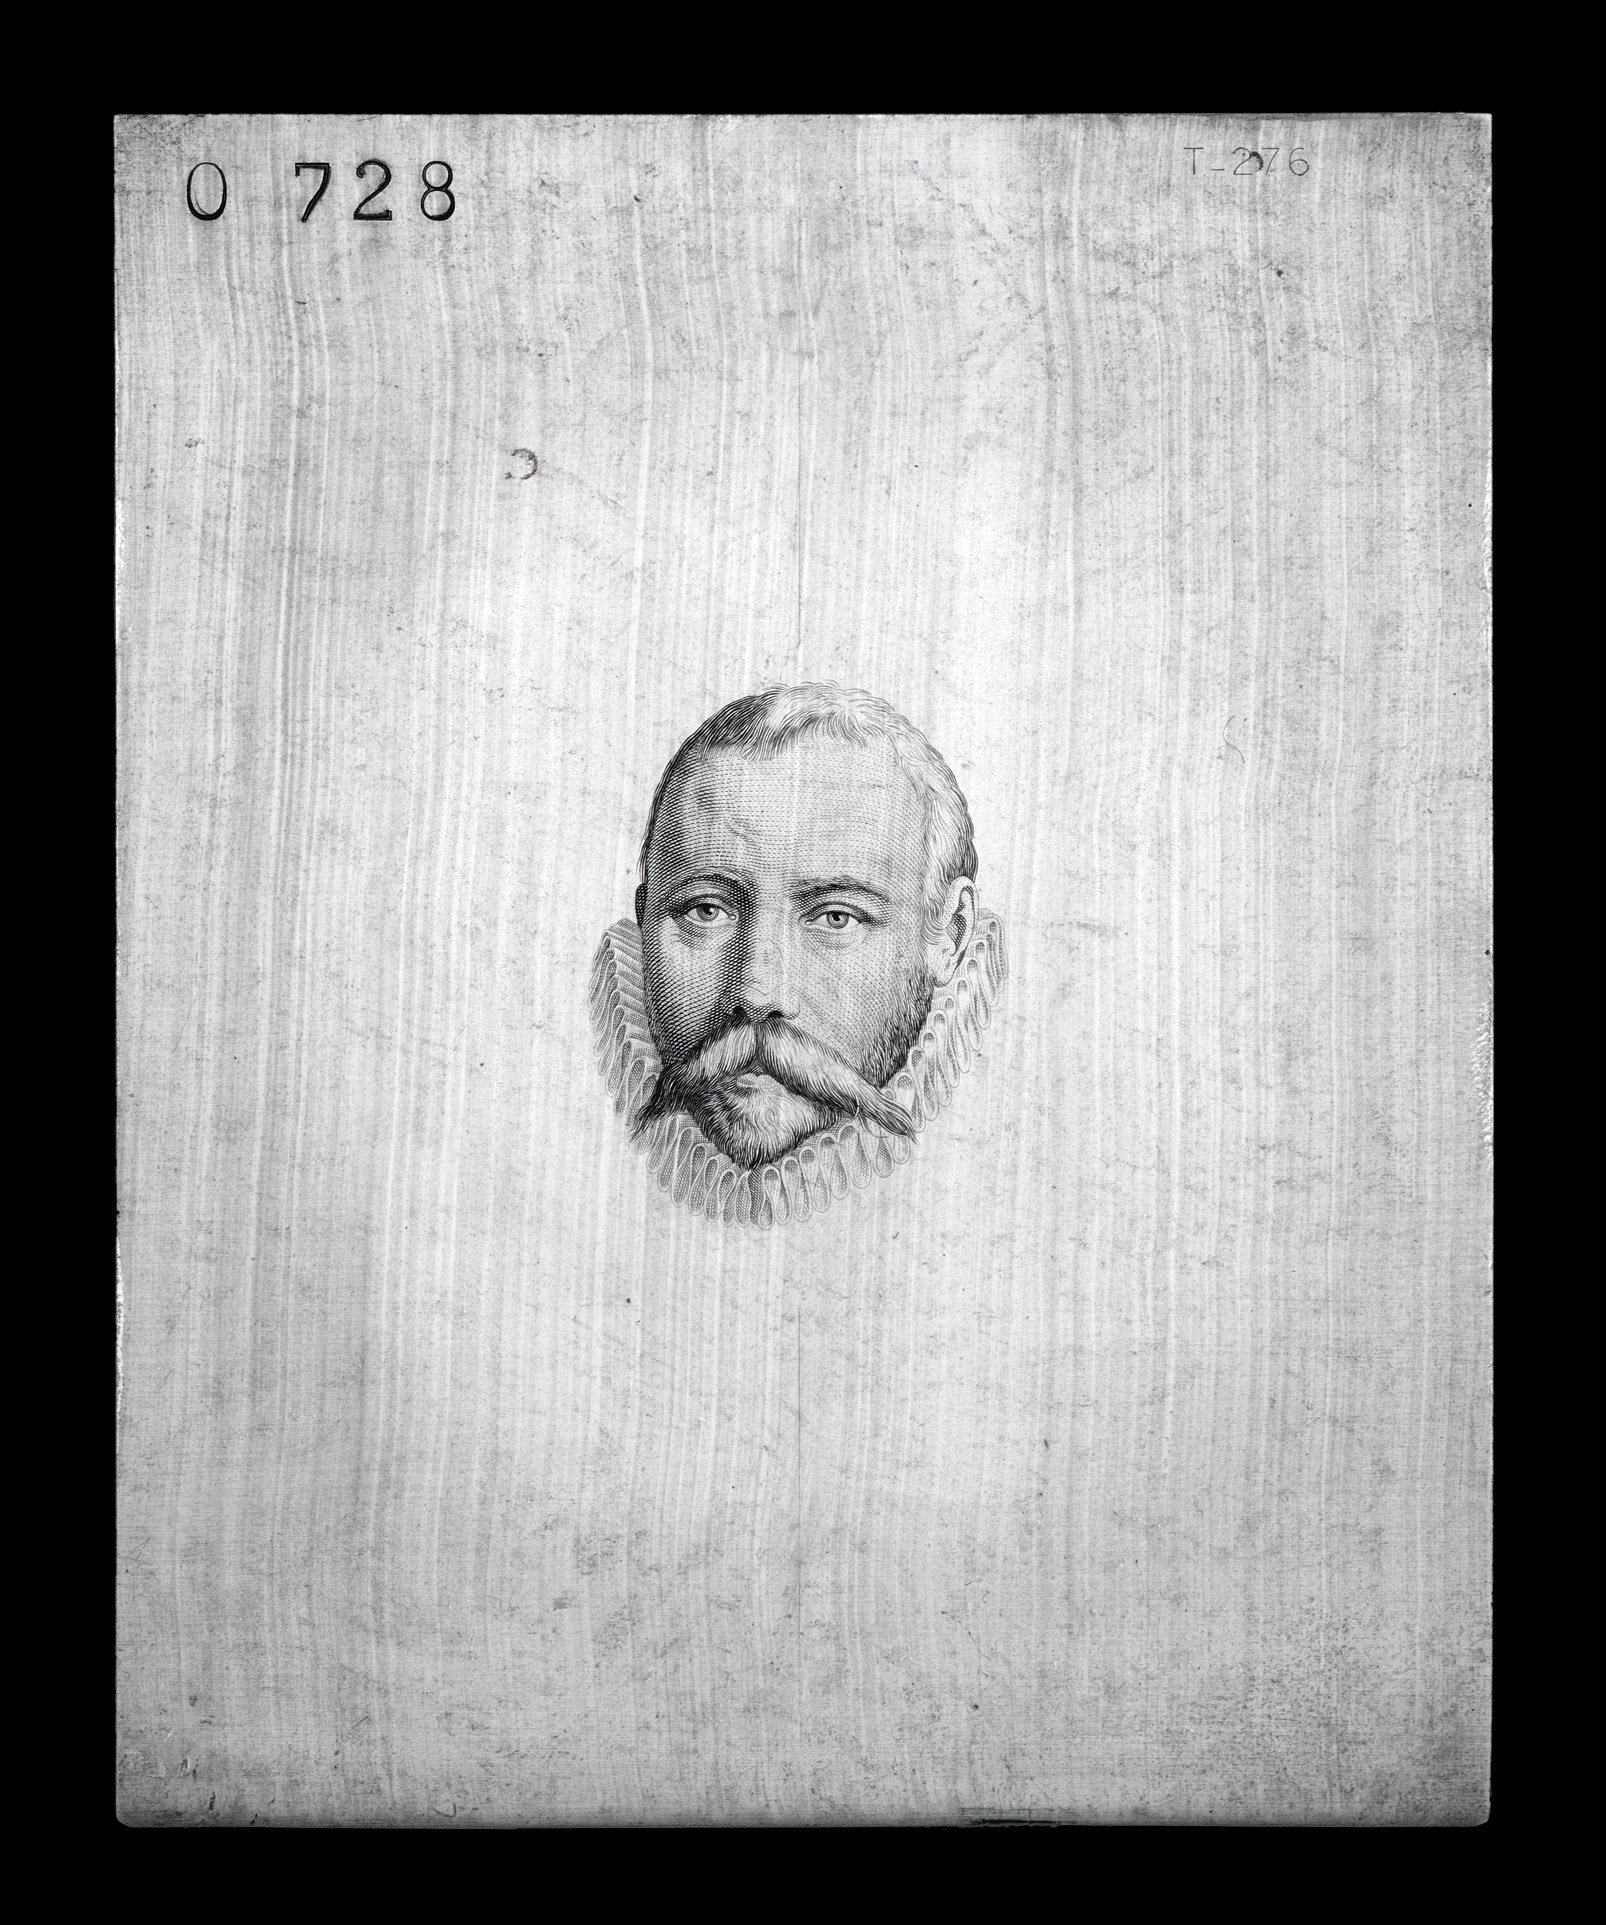 Steel printing plate with a portrait of the astronomer Tycho Brahe for the production of emergency banknotes. Photo: John Lee, 2011.